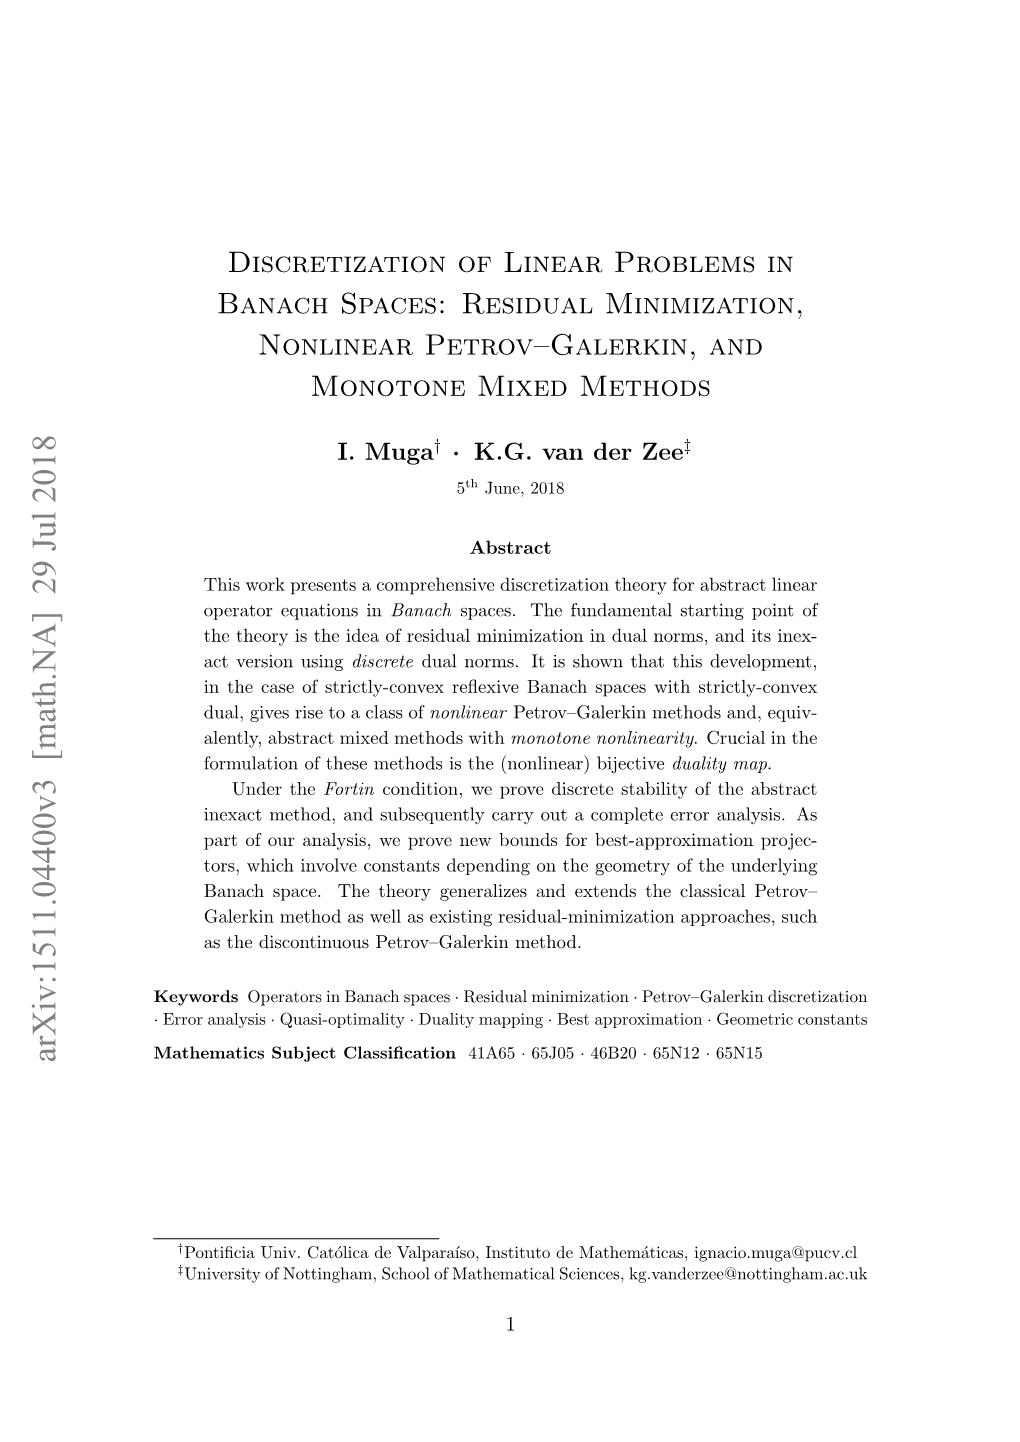 Discretization of Linear Problems in Banach Spaces: Residual Minimization, Nonlinear Petrov–Galerkin, and Monotone Mixed Methods